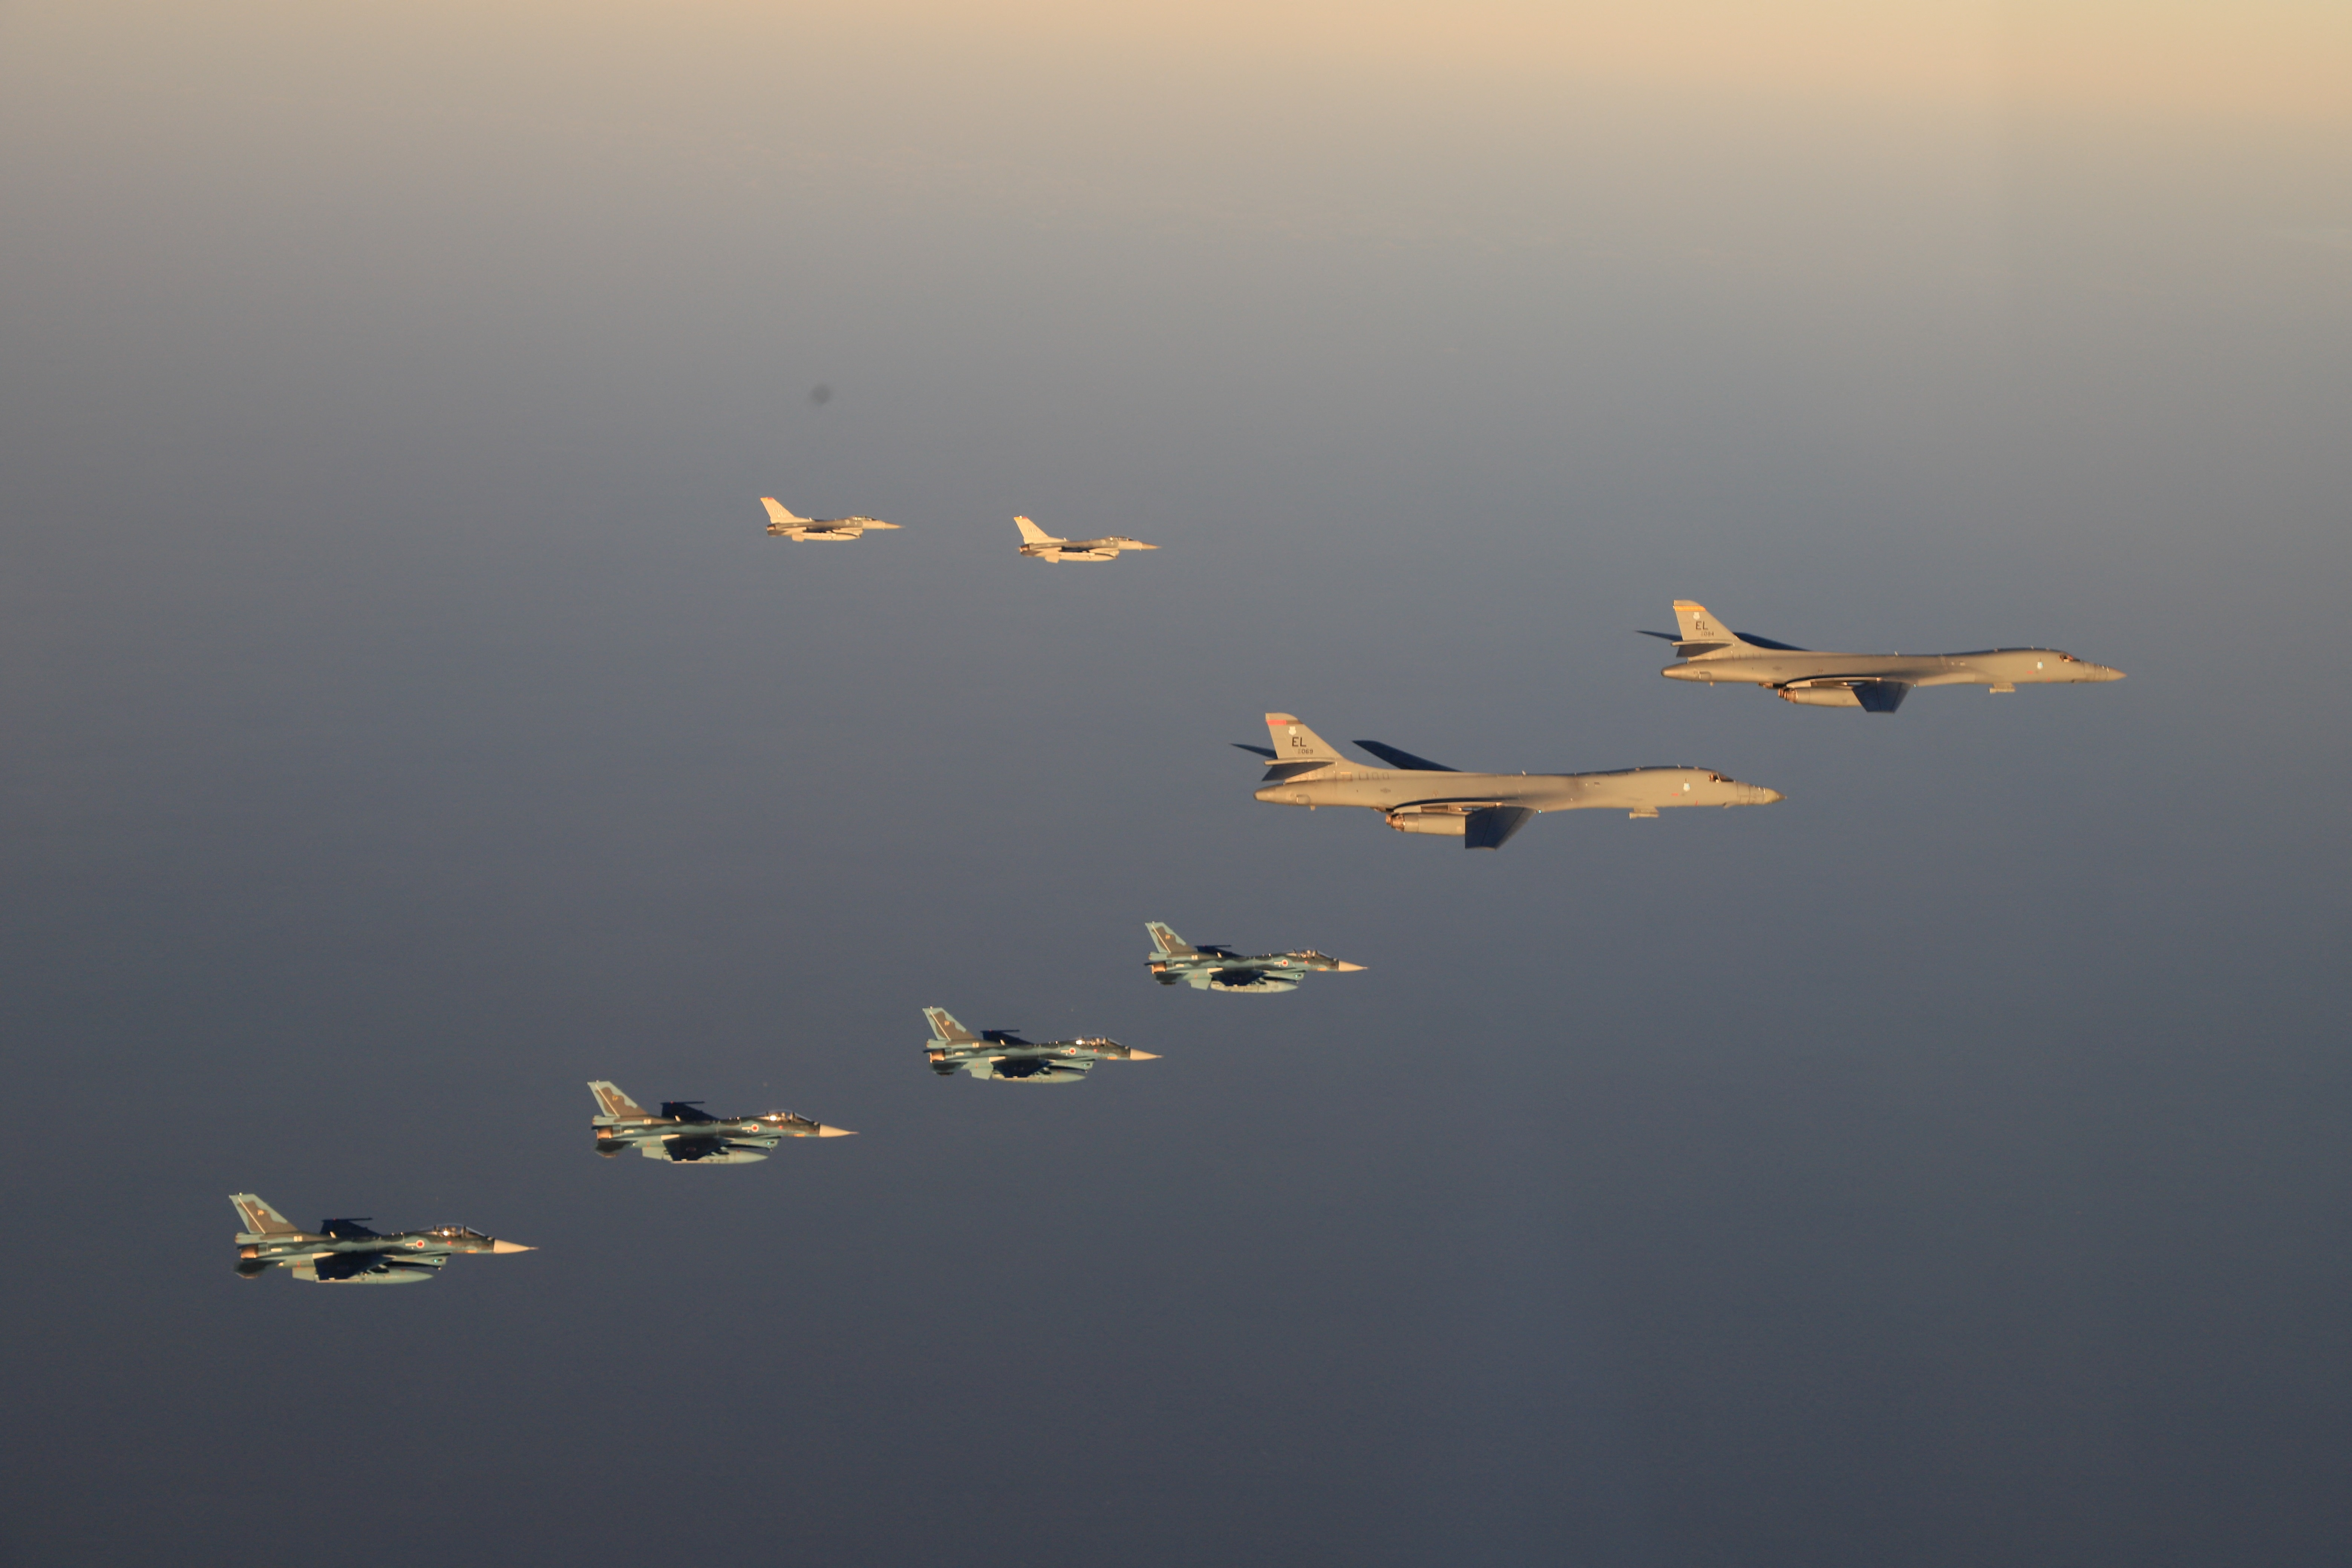 F-2 fighters from the 8th Air Wing of the Japan Air Self-Defense Force conduct a joint military drill with B-1B bombers from the US 28th Bomb Wing and F-16 fighters from the 35th Bomb Wing Fighter aircraft off Japan's southernmost main island, Kyushu, Japan, in this handout photo taken by the Japan Air Self-Defense Force and released by the Japan Ministry of Defense Joint Chiefs of Staff Office.  Japan Ministry of Defense Office of the Joint Chiefs of Staff/HANDOUT via REUTERS 